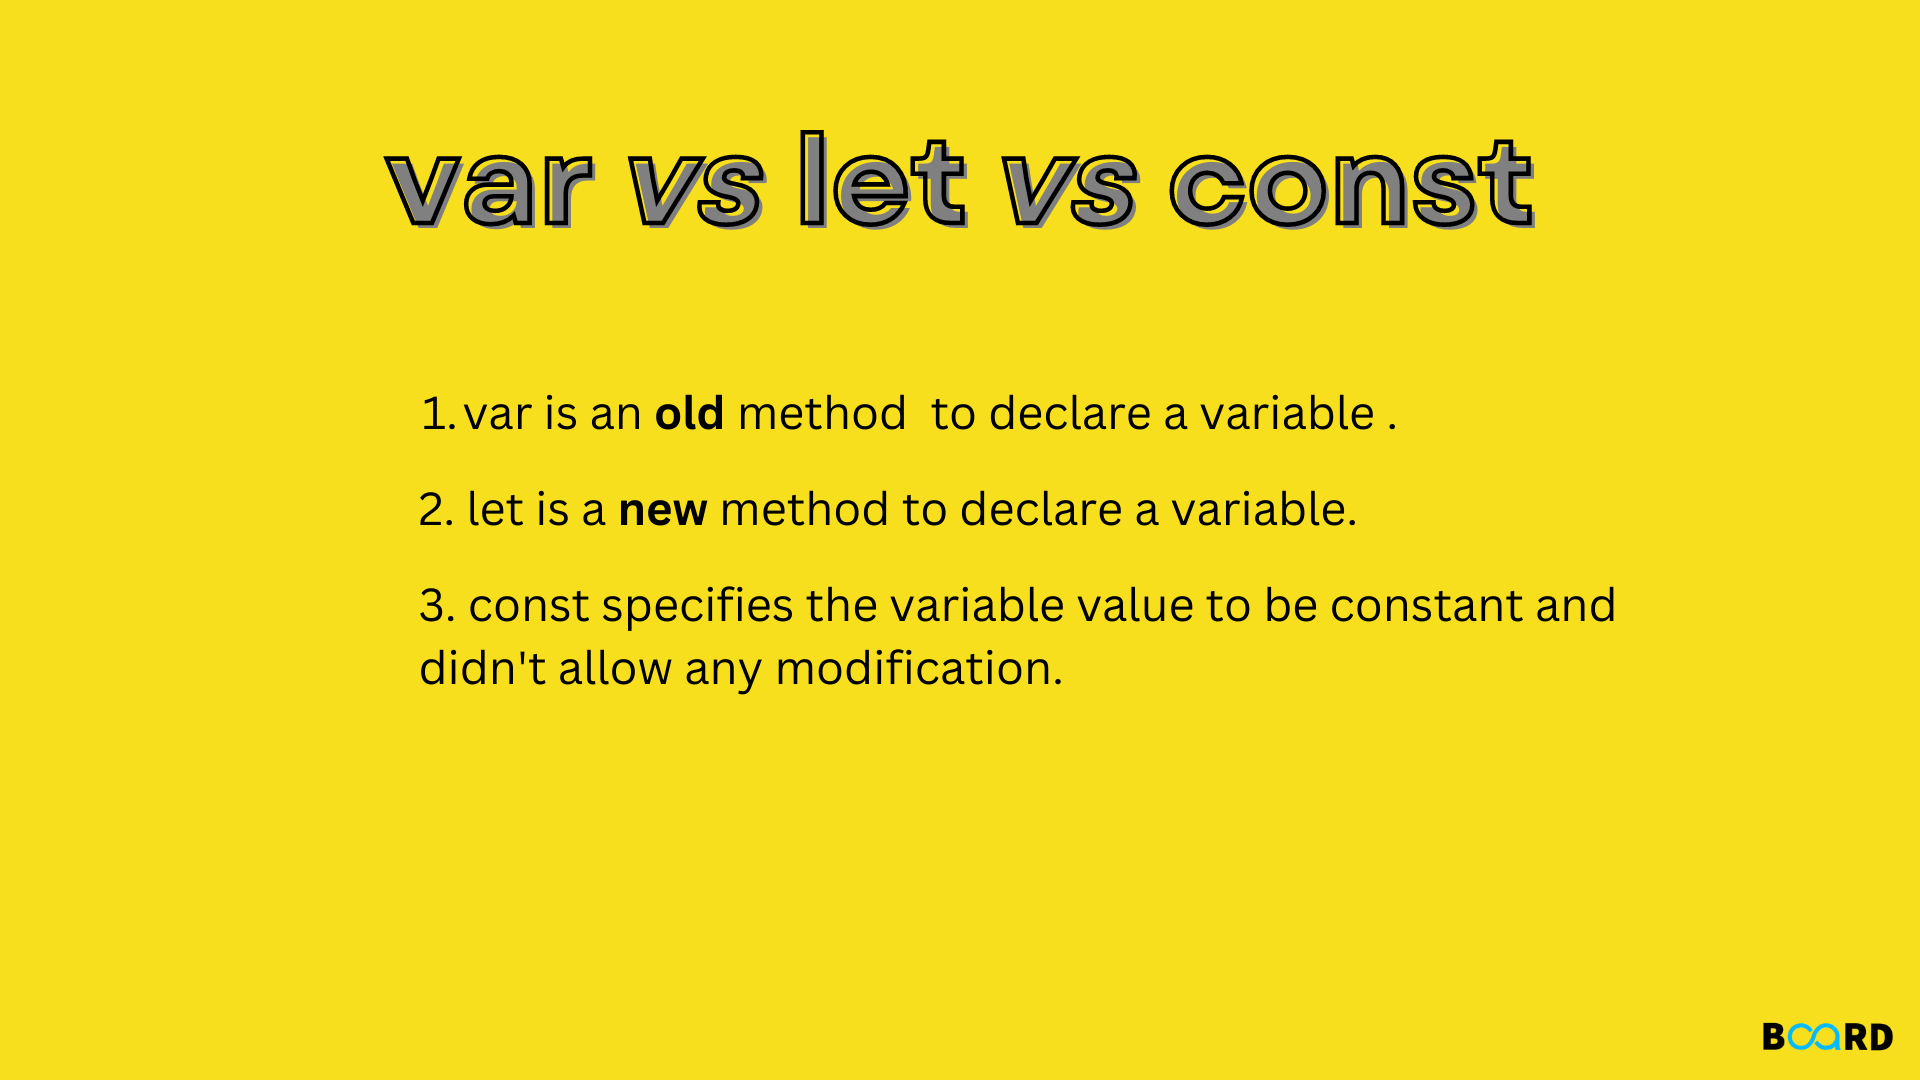 Var, Let and Const: Description and Differences